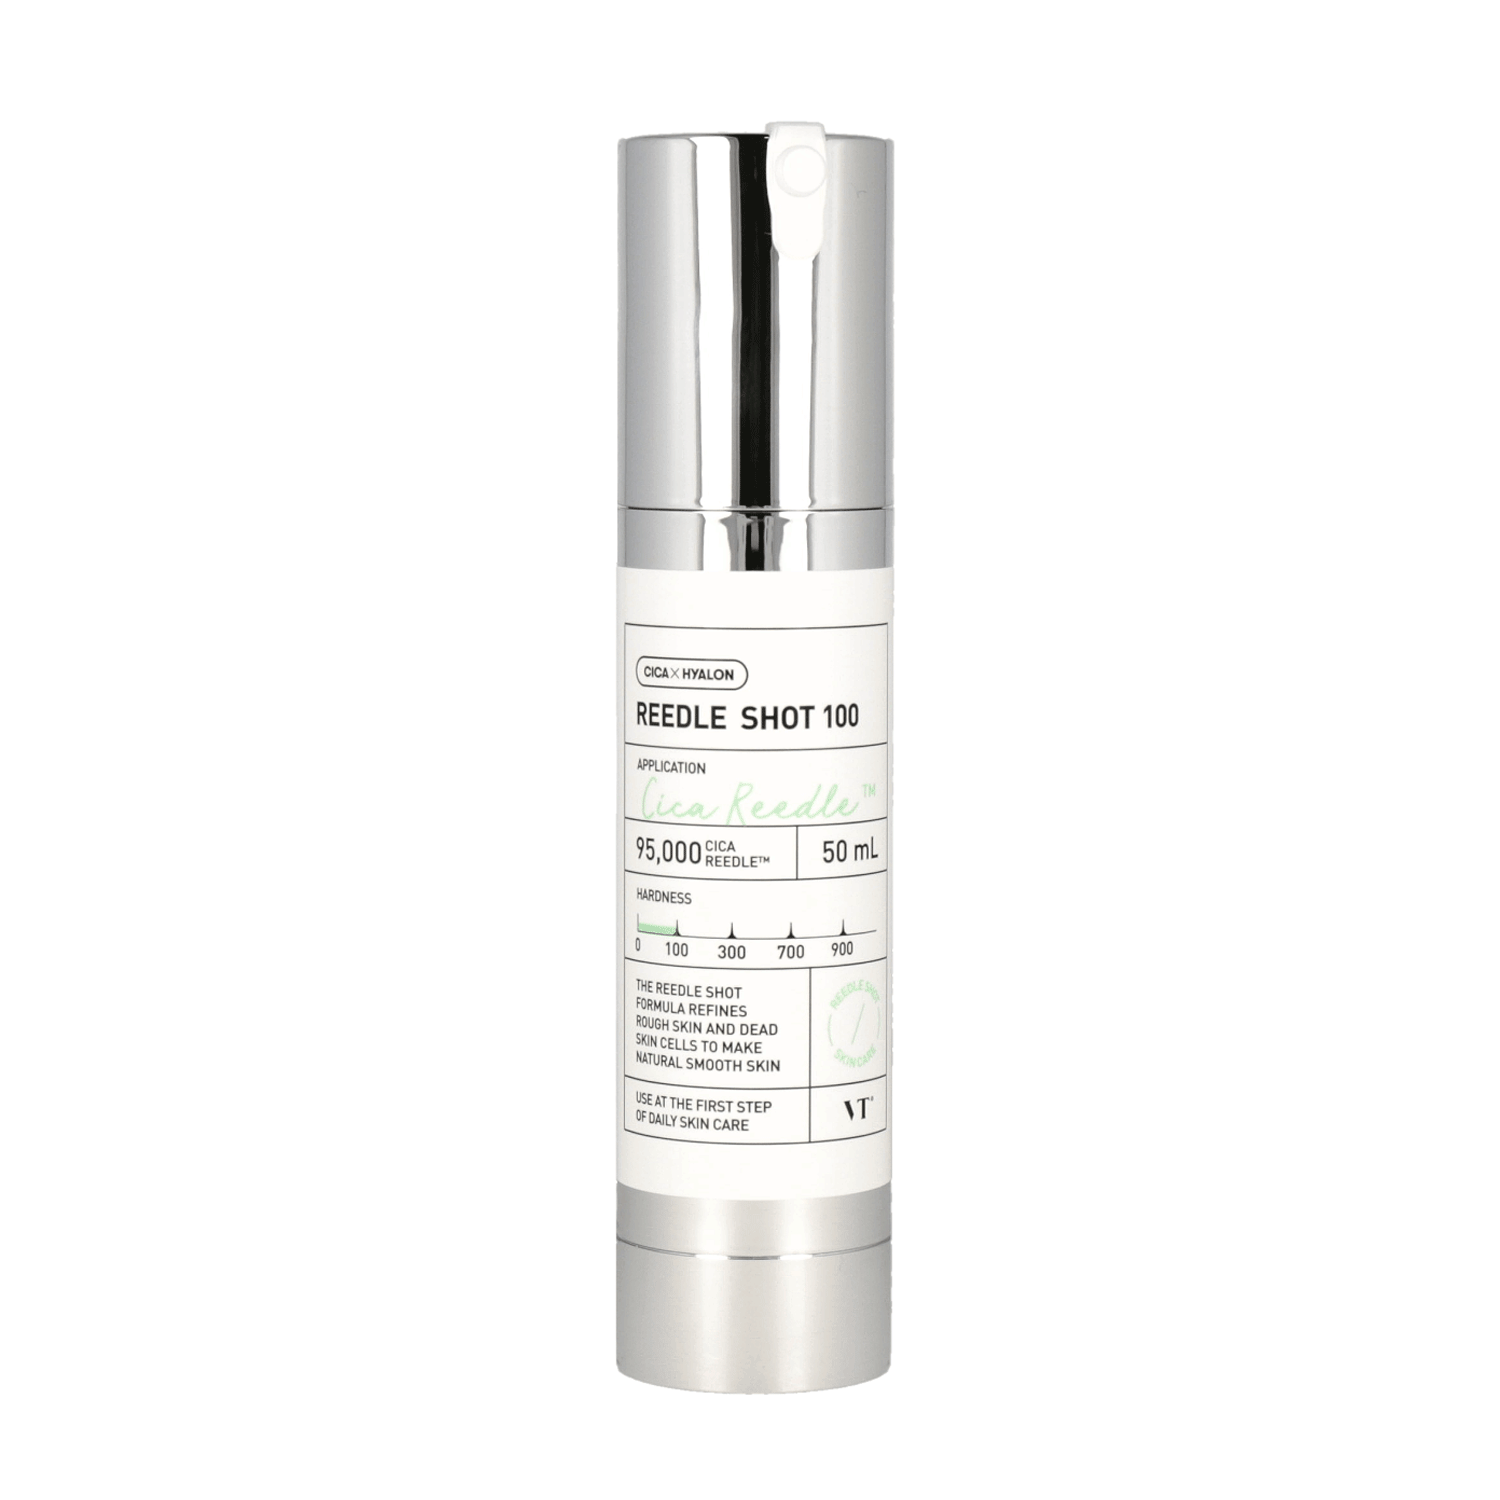 VT Cosmetics Reedle Shot 100 Essence 50ml - Incorporates innovative reedle technology that delivers active ingredients deep into the skin for enhanced absorption and efficacy.